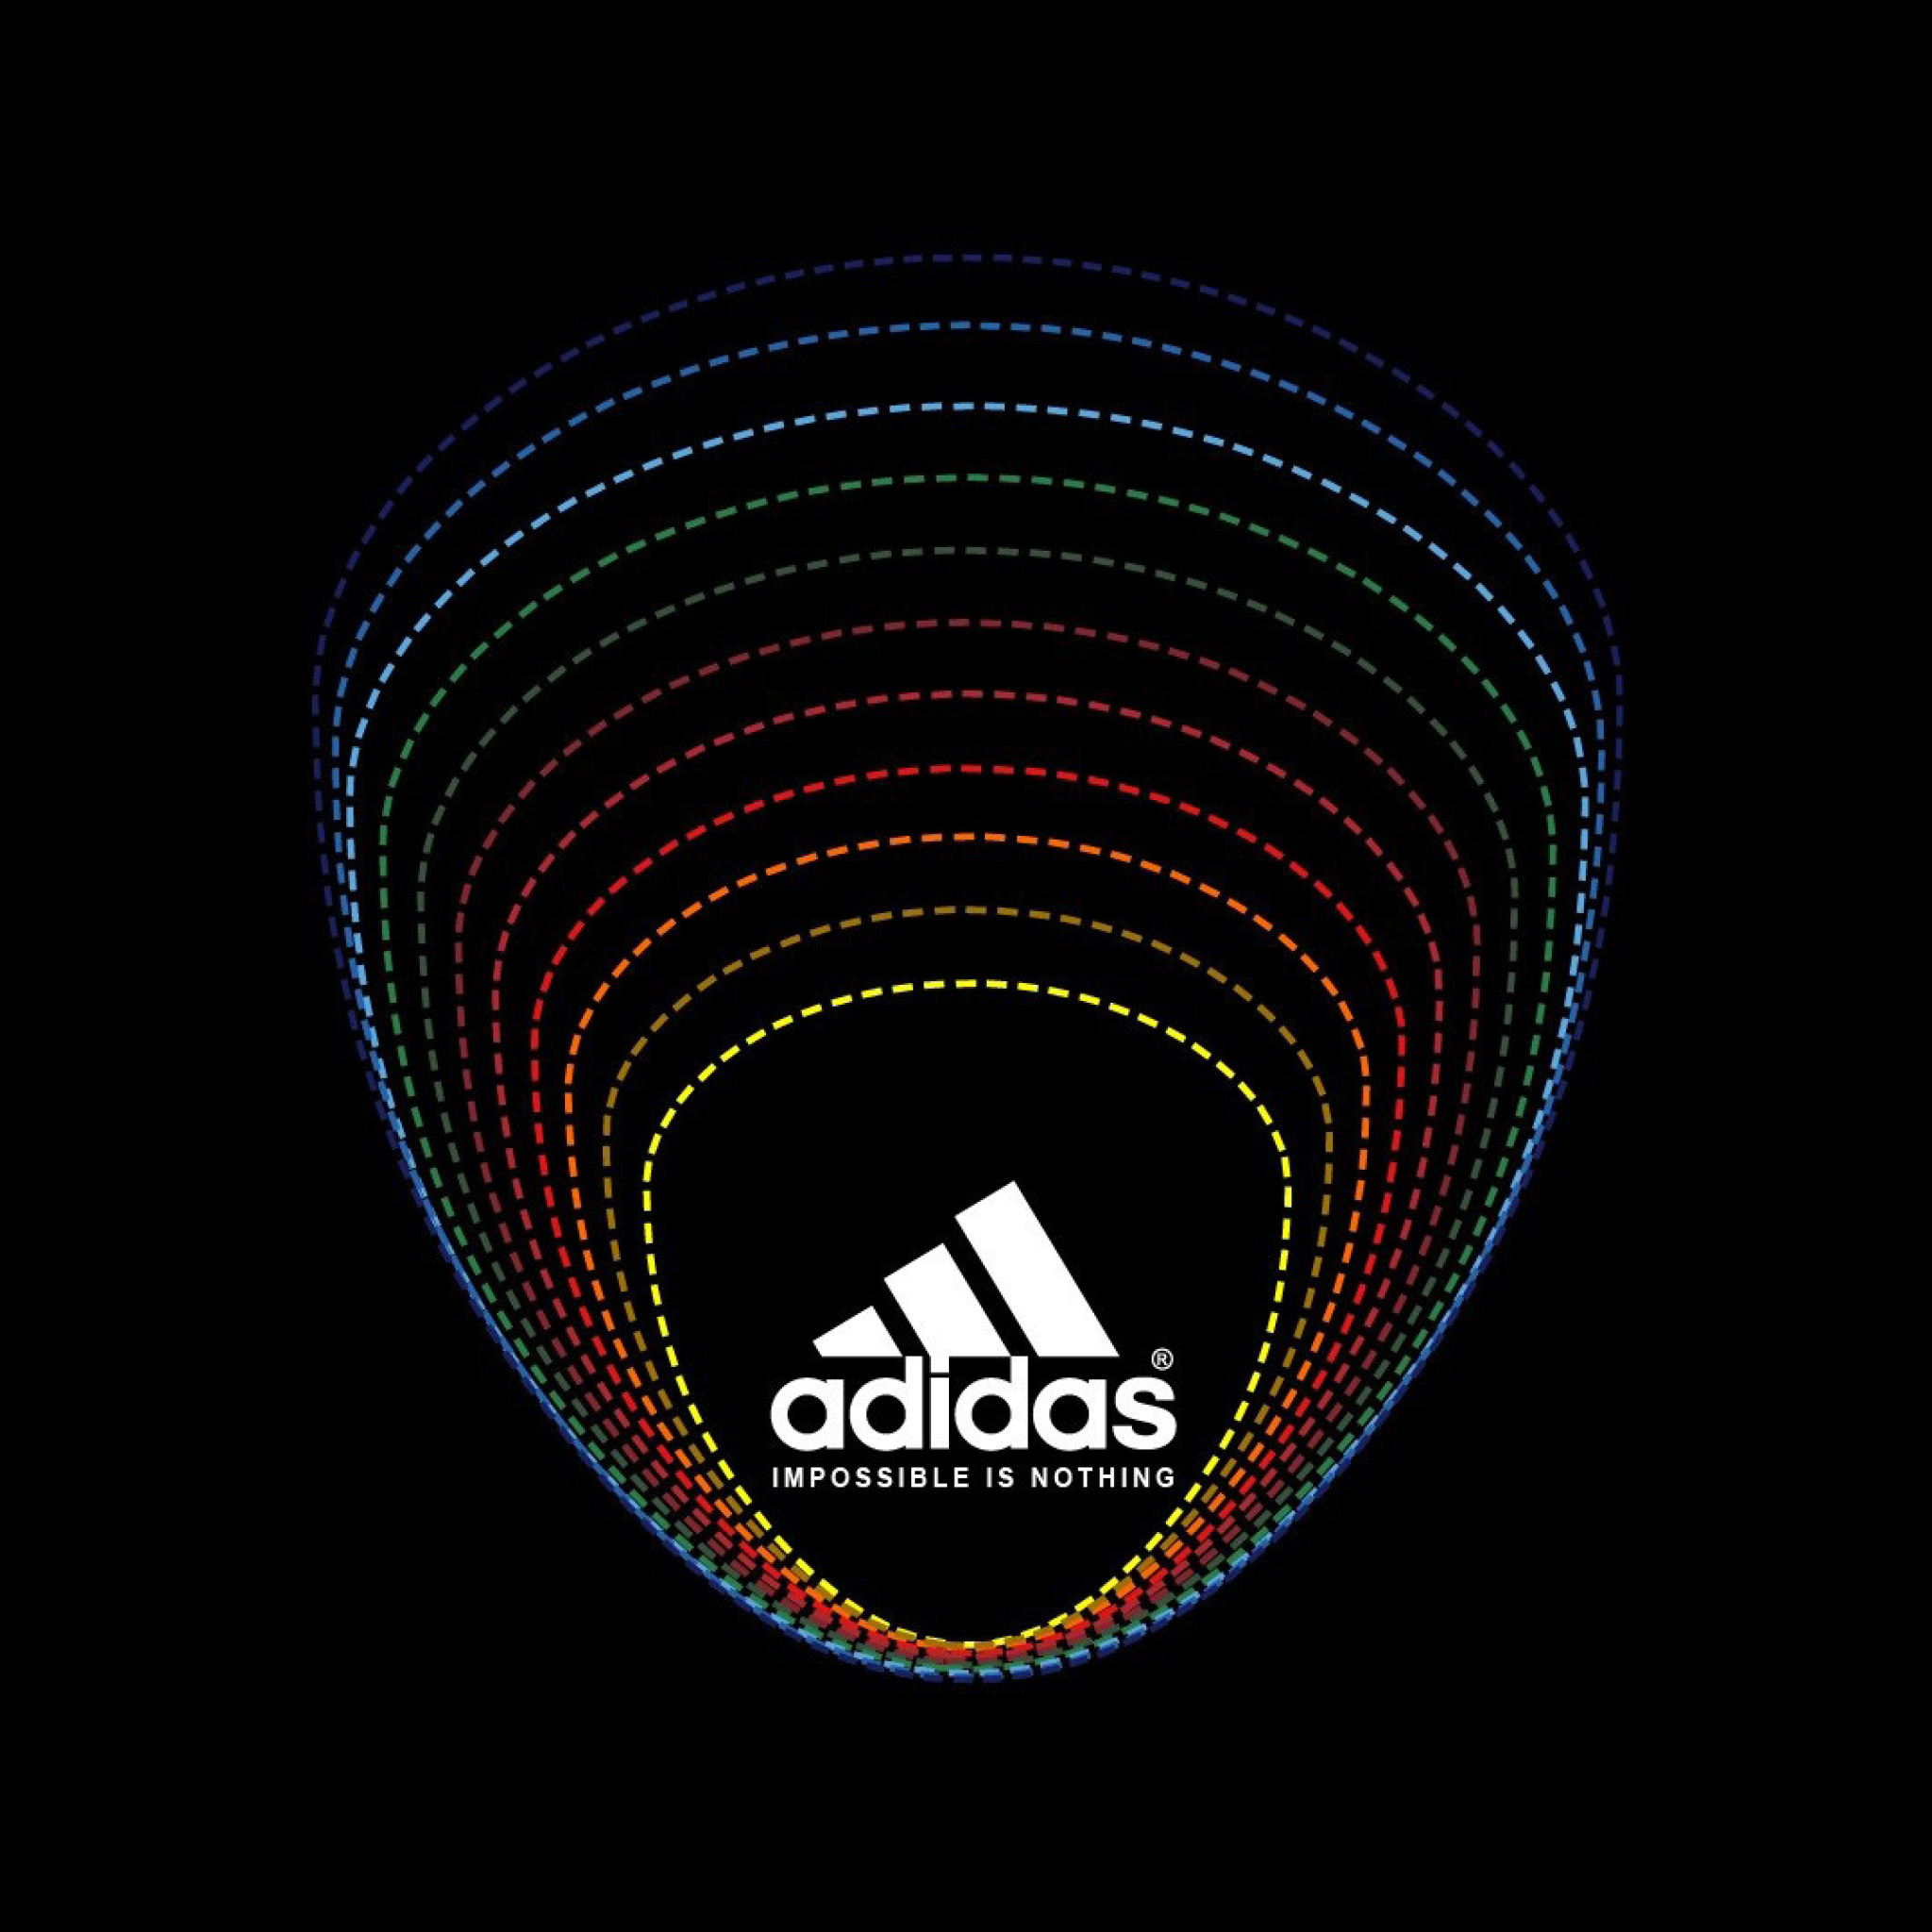 Обои Adidas Tagline, Impossible is Nothing 2048x2048